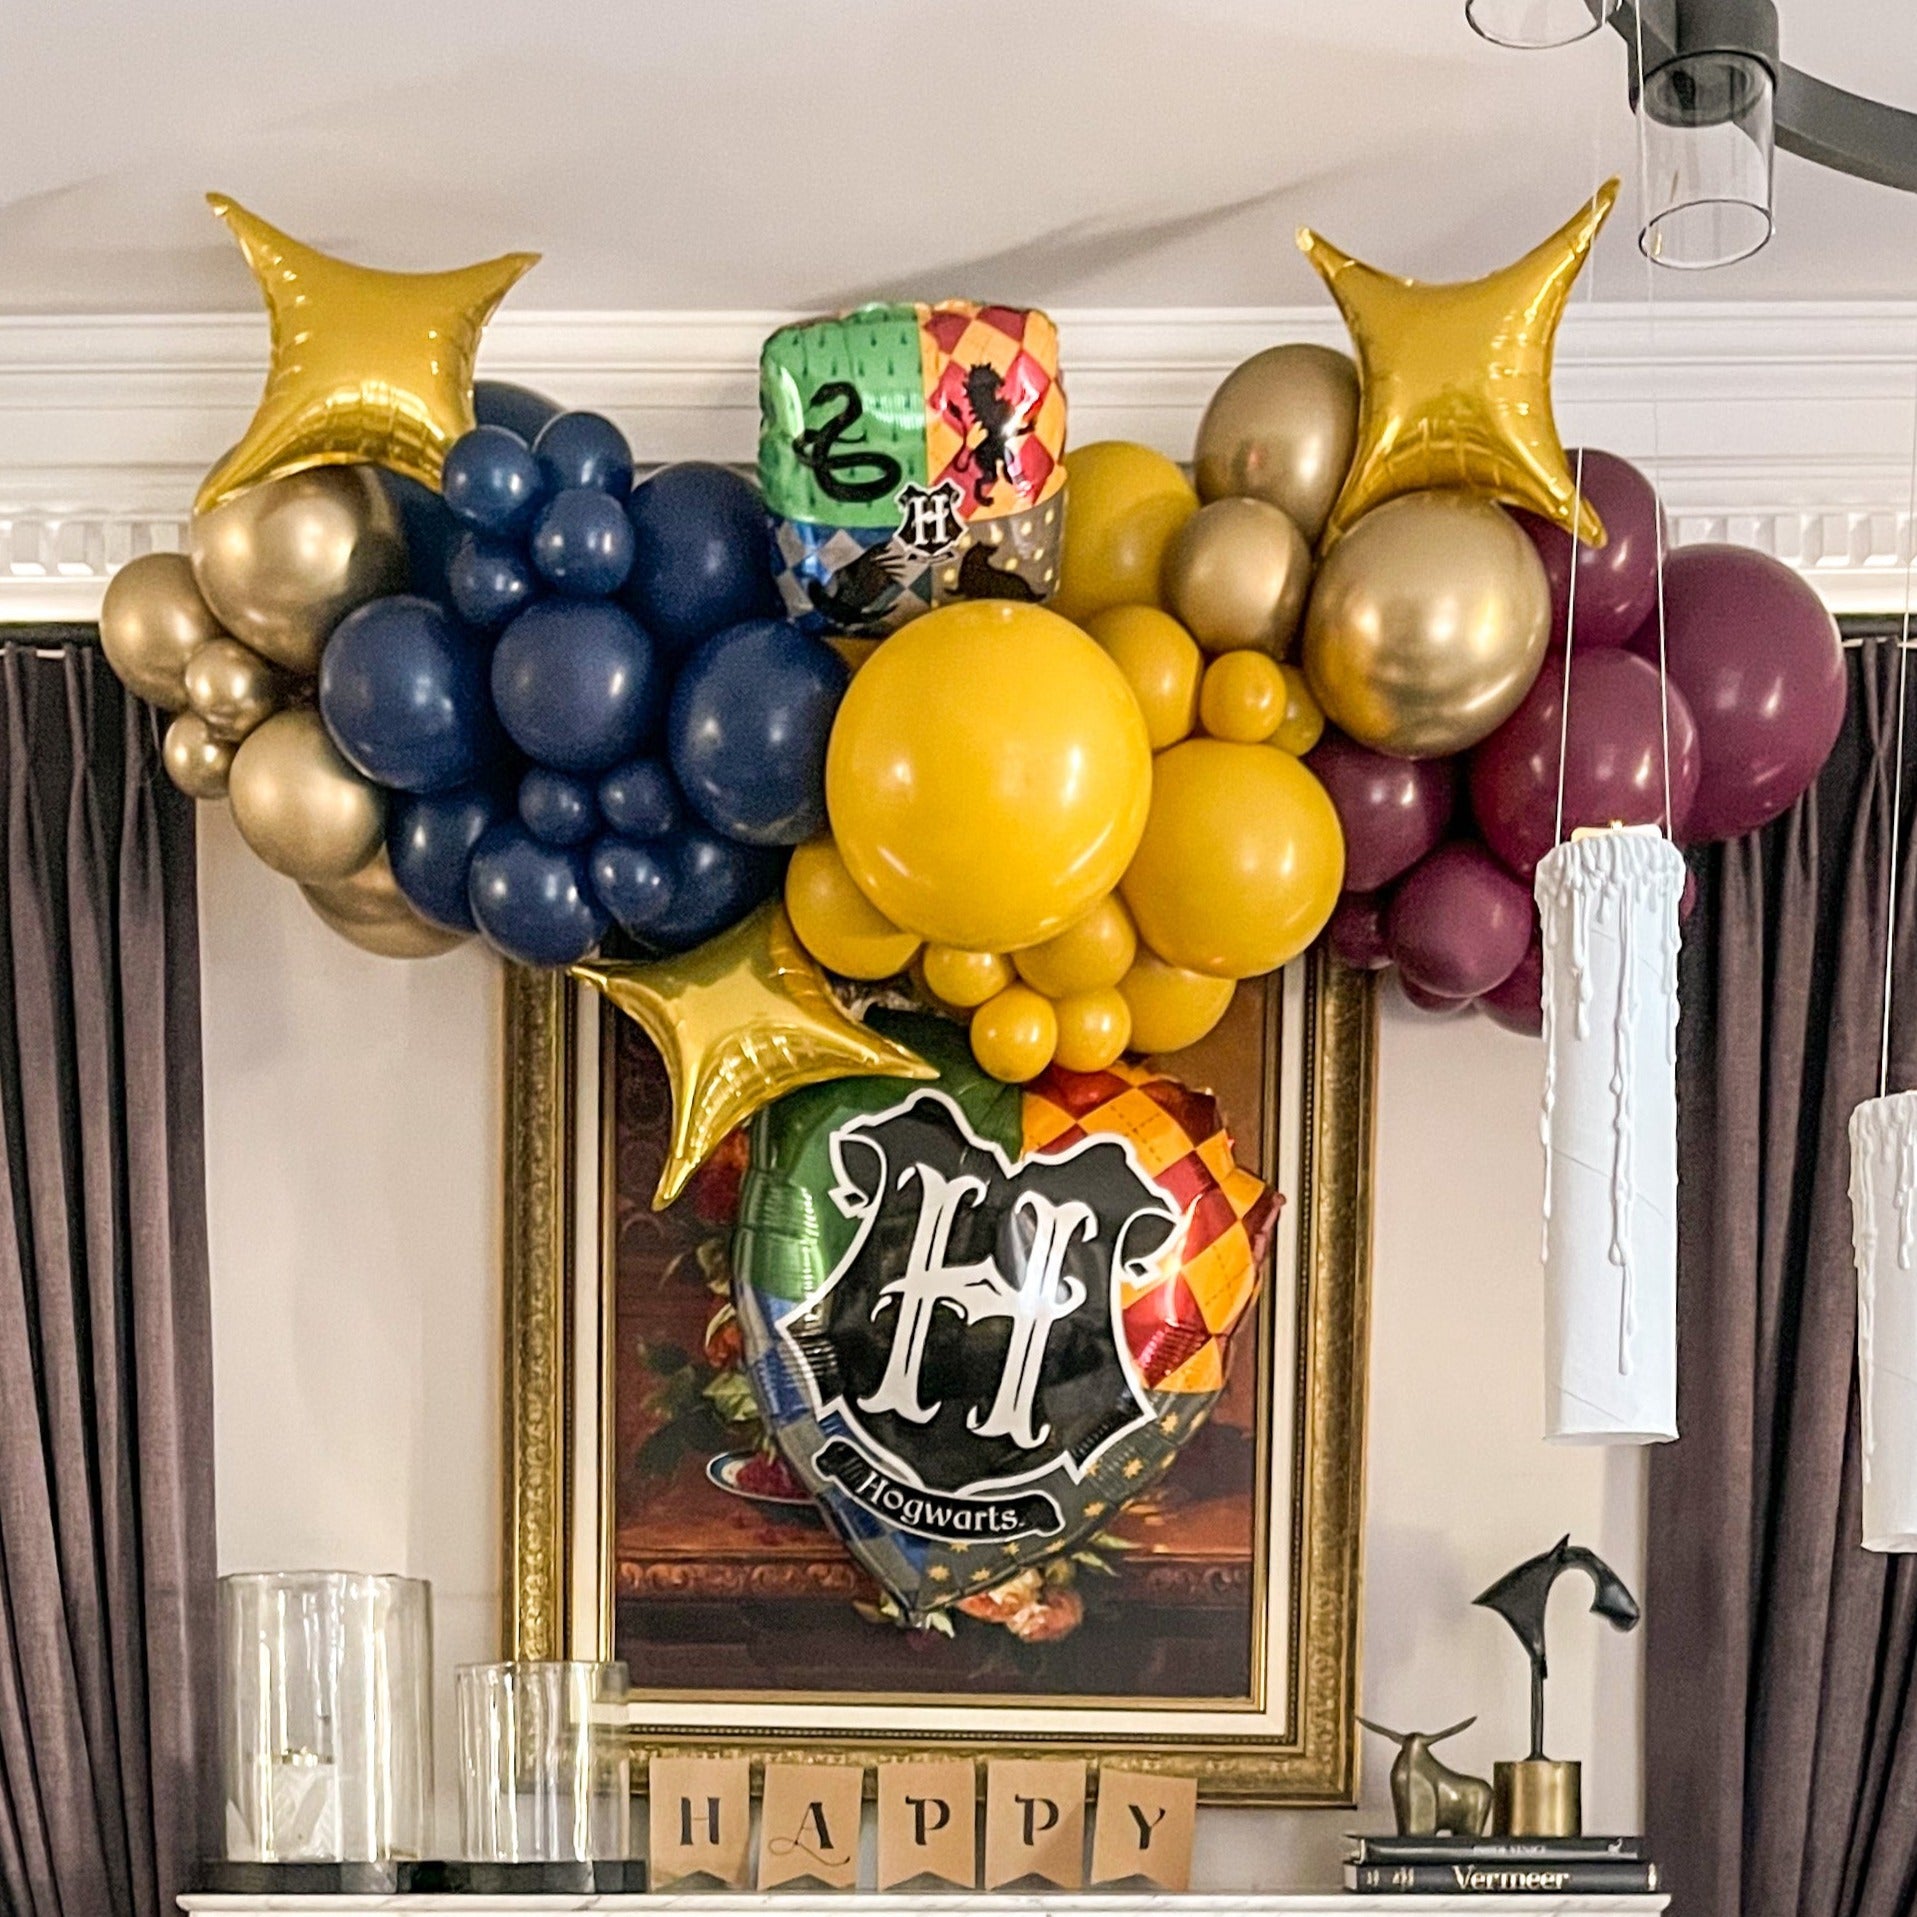 Harry Potter  Harry potter balloons, Harry potter crafts, Harry potter  theme party